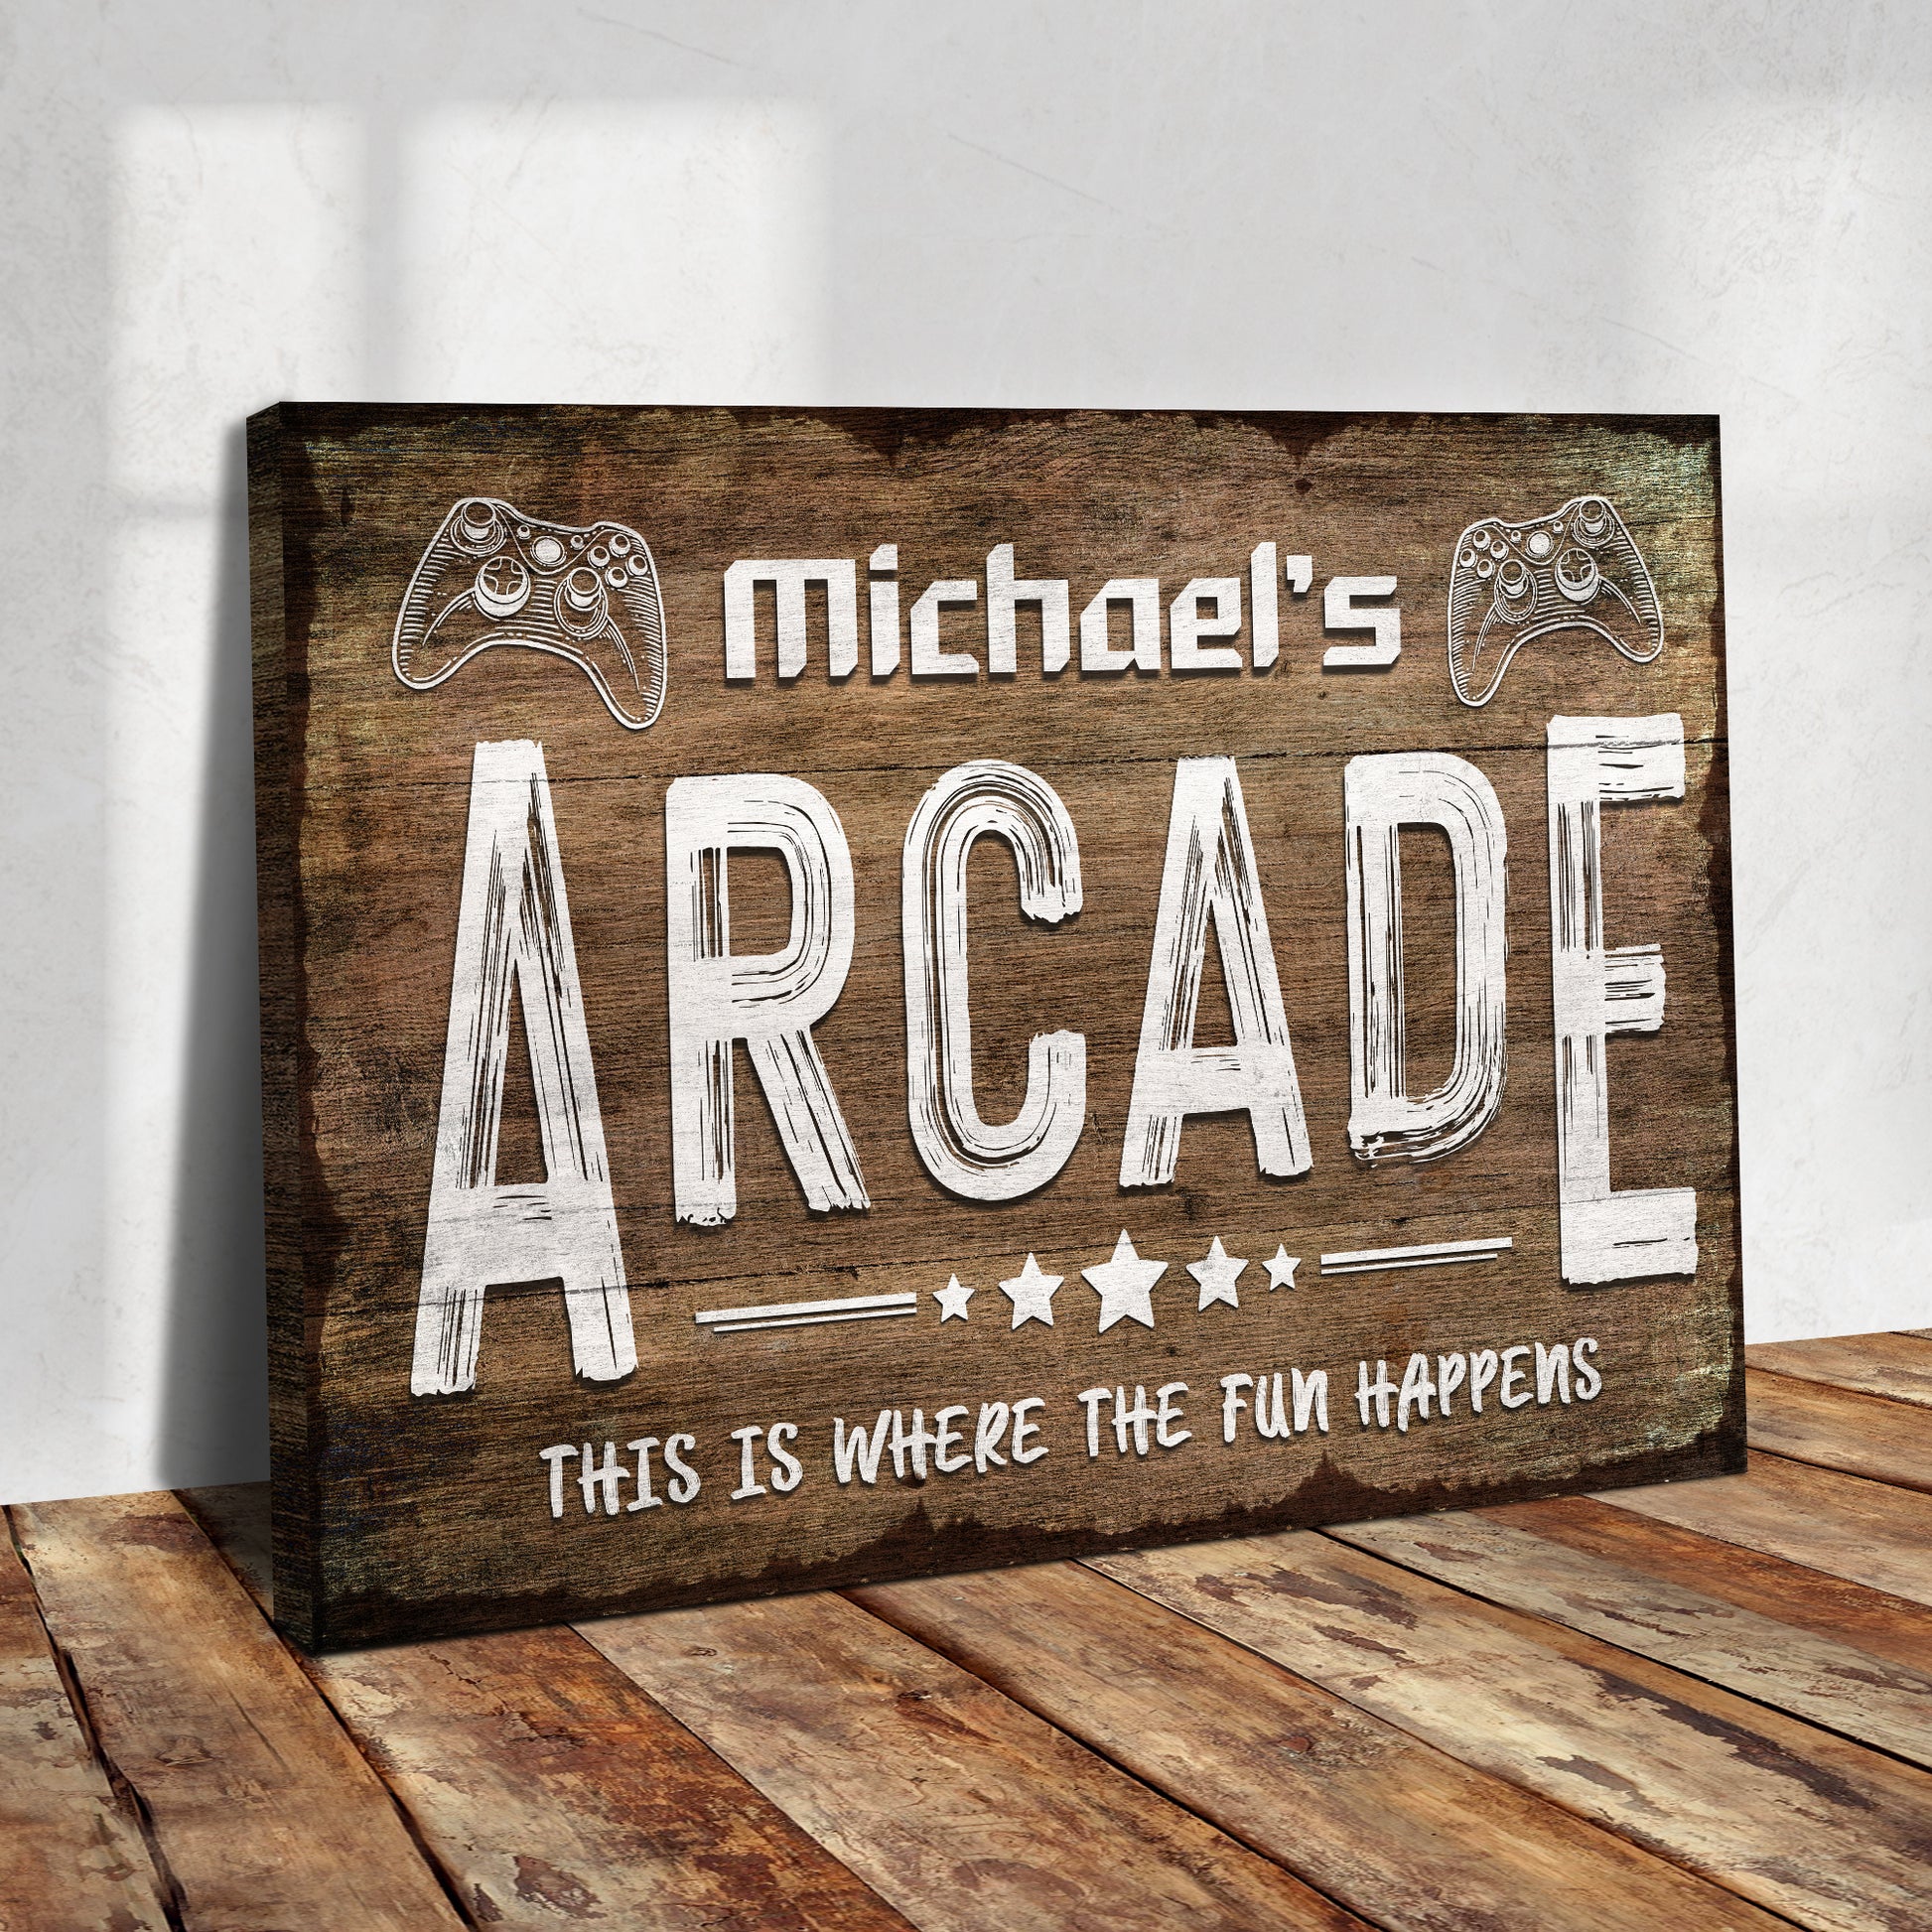 Arcade Sign II - Image by Tailored Canvases